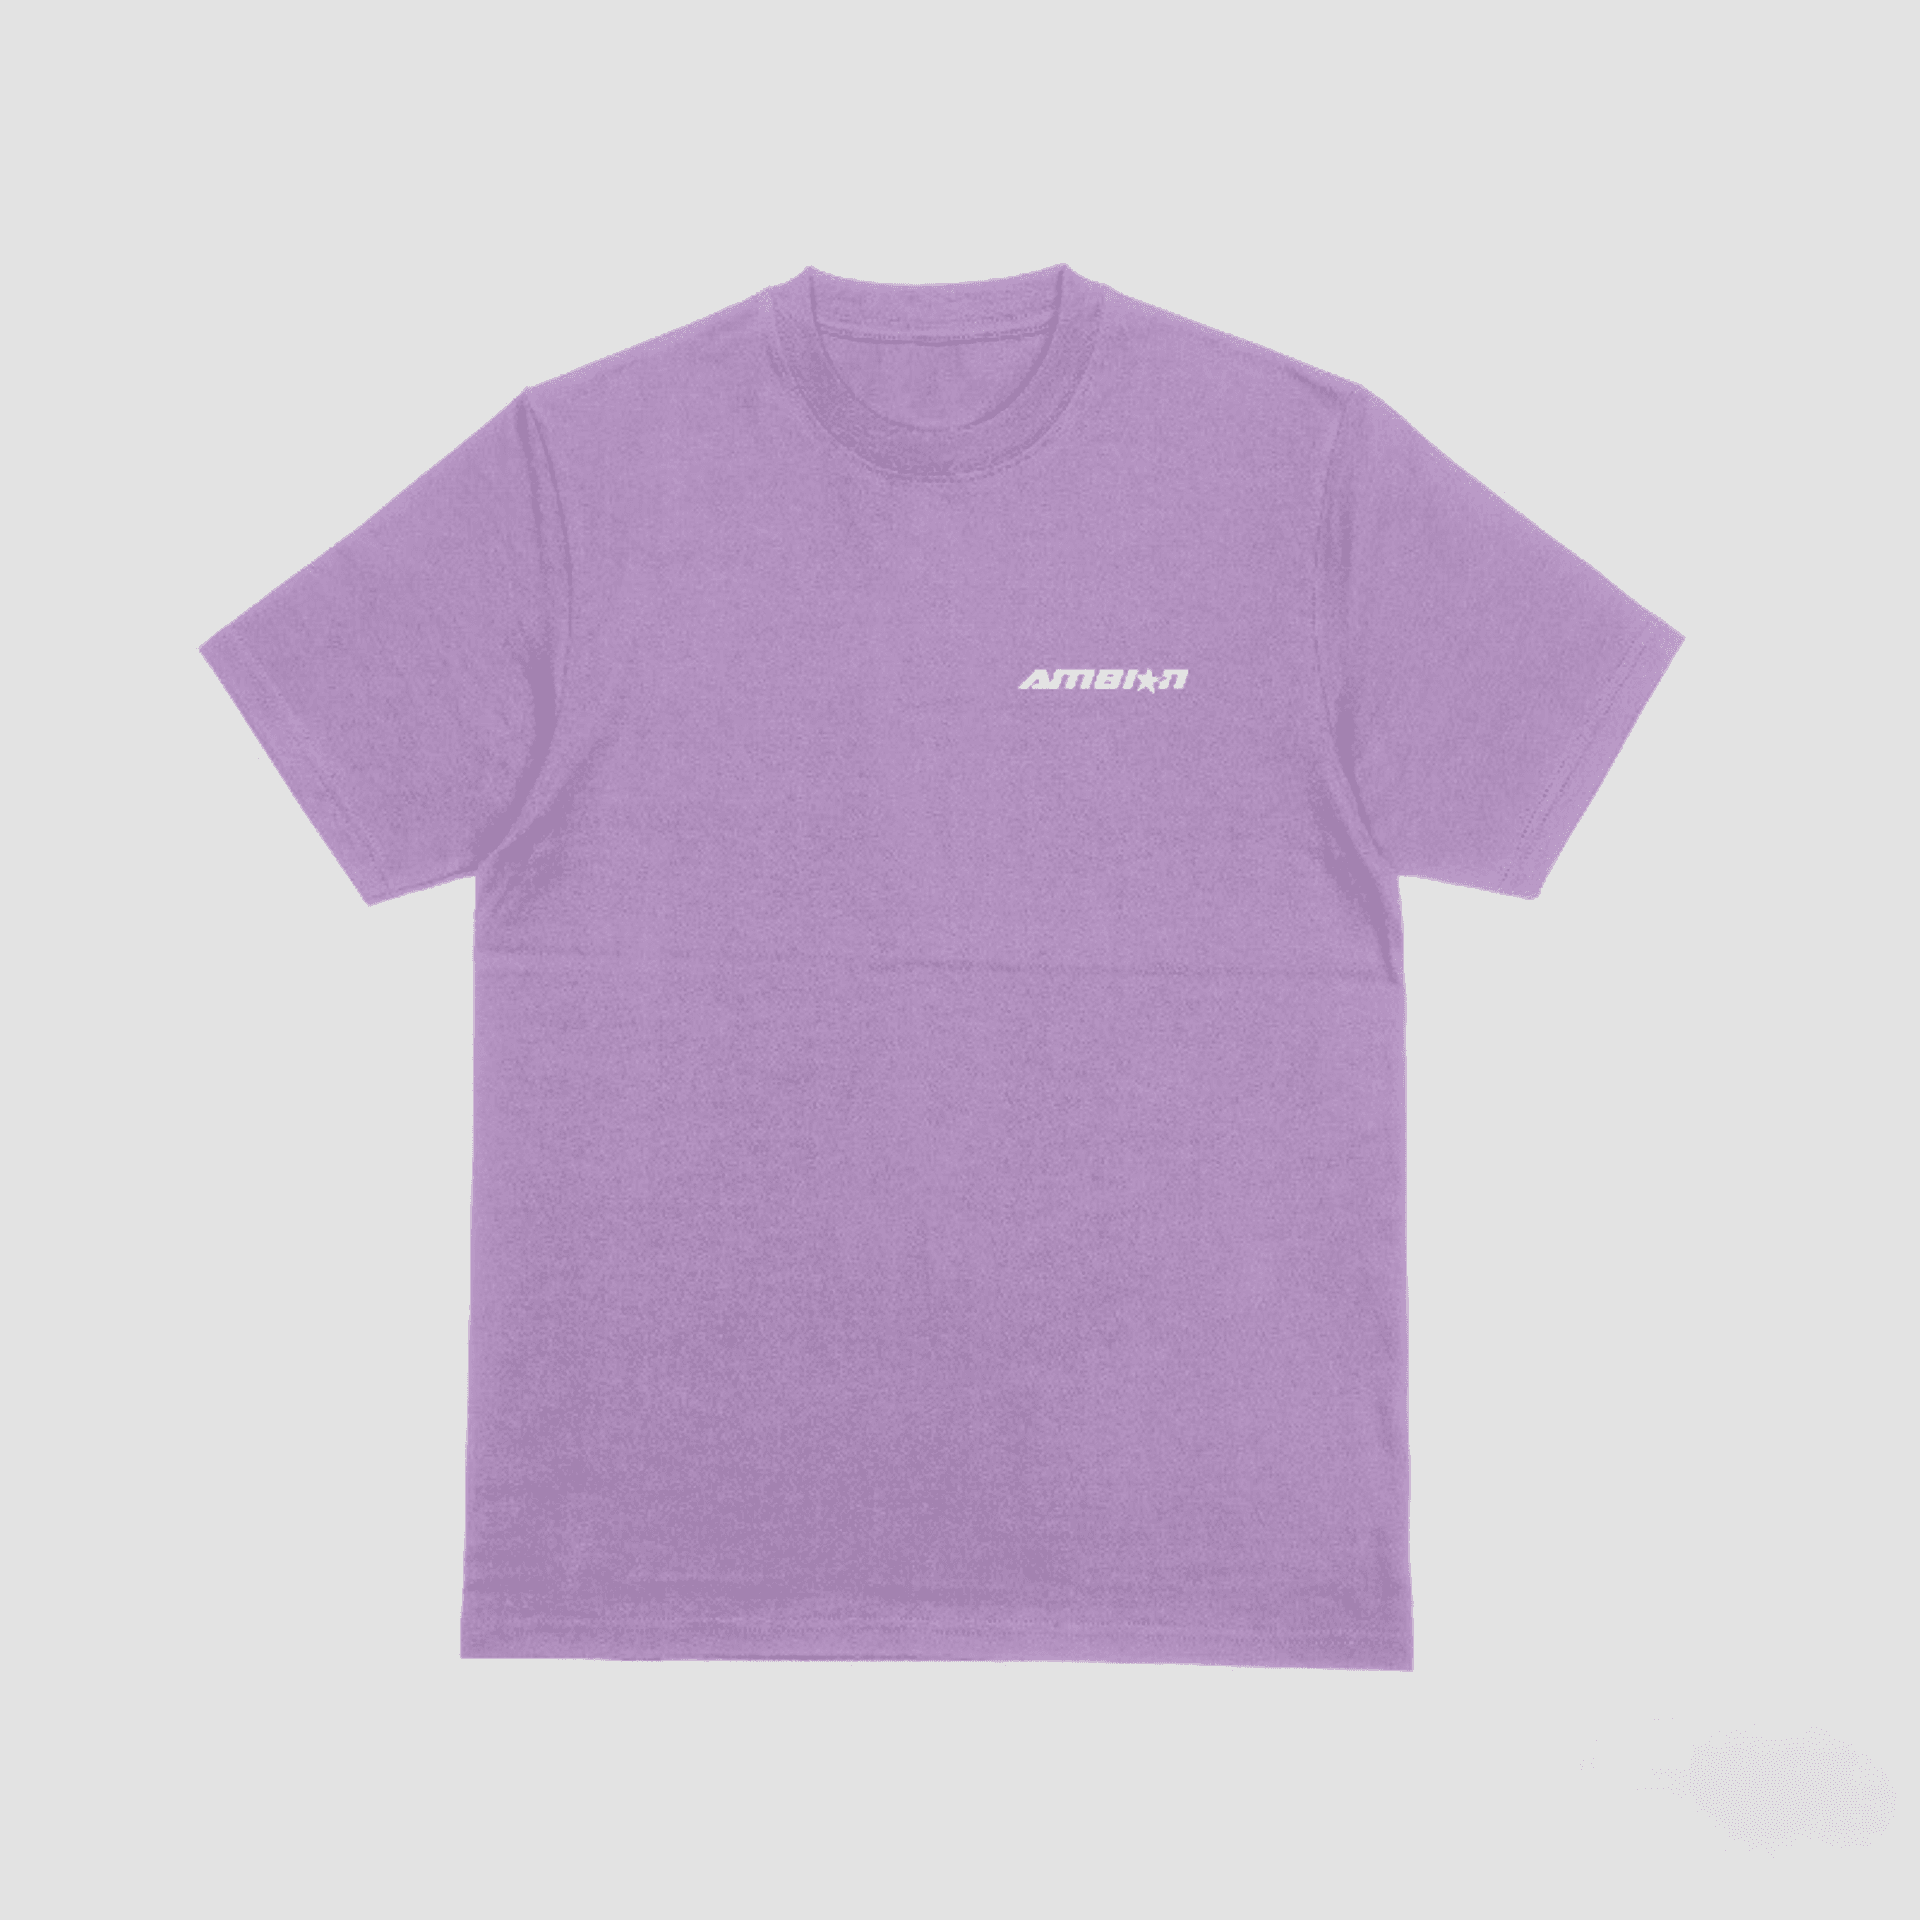 Lavender Dream plain shirt with logo that's perfect for summer.